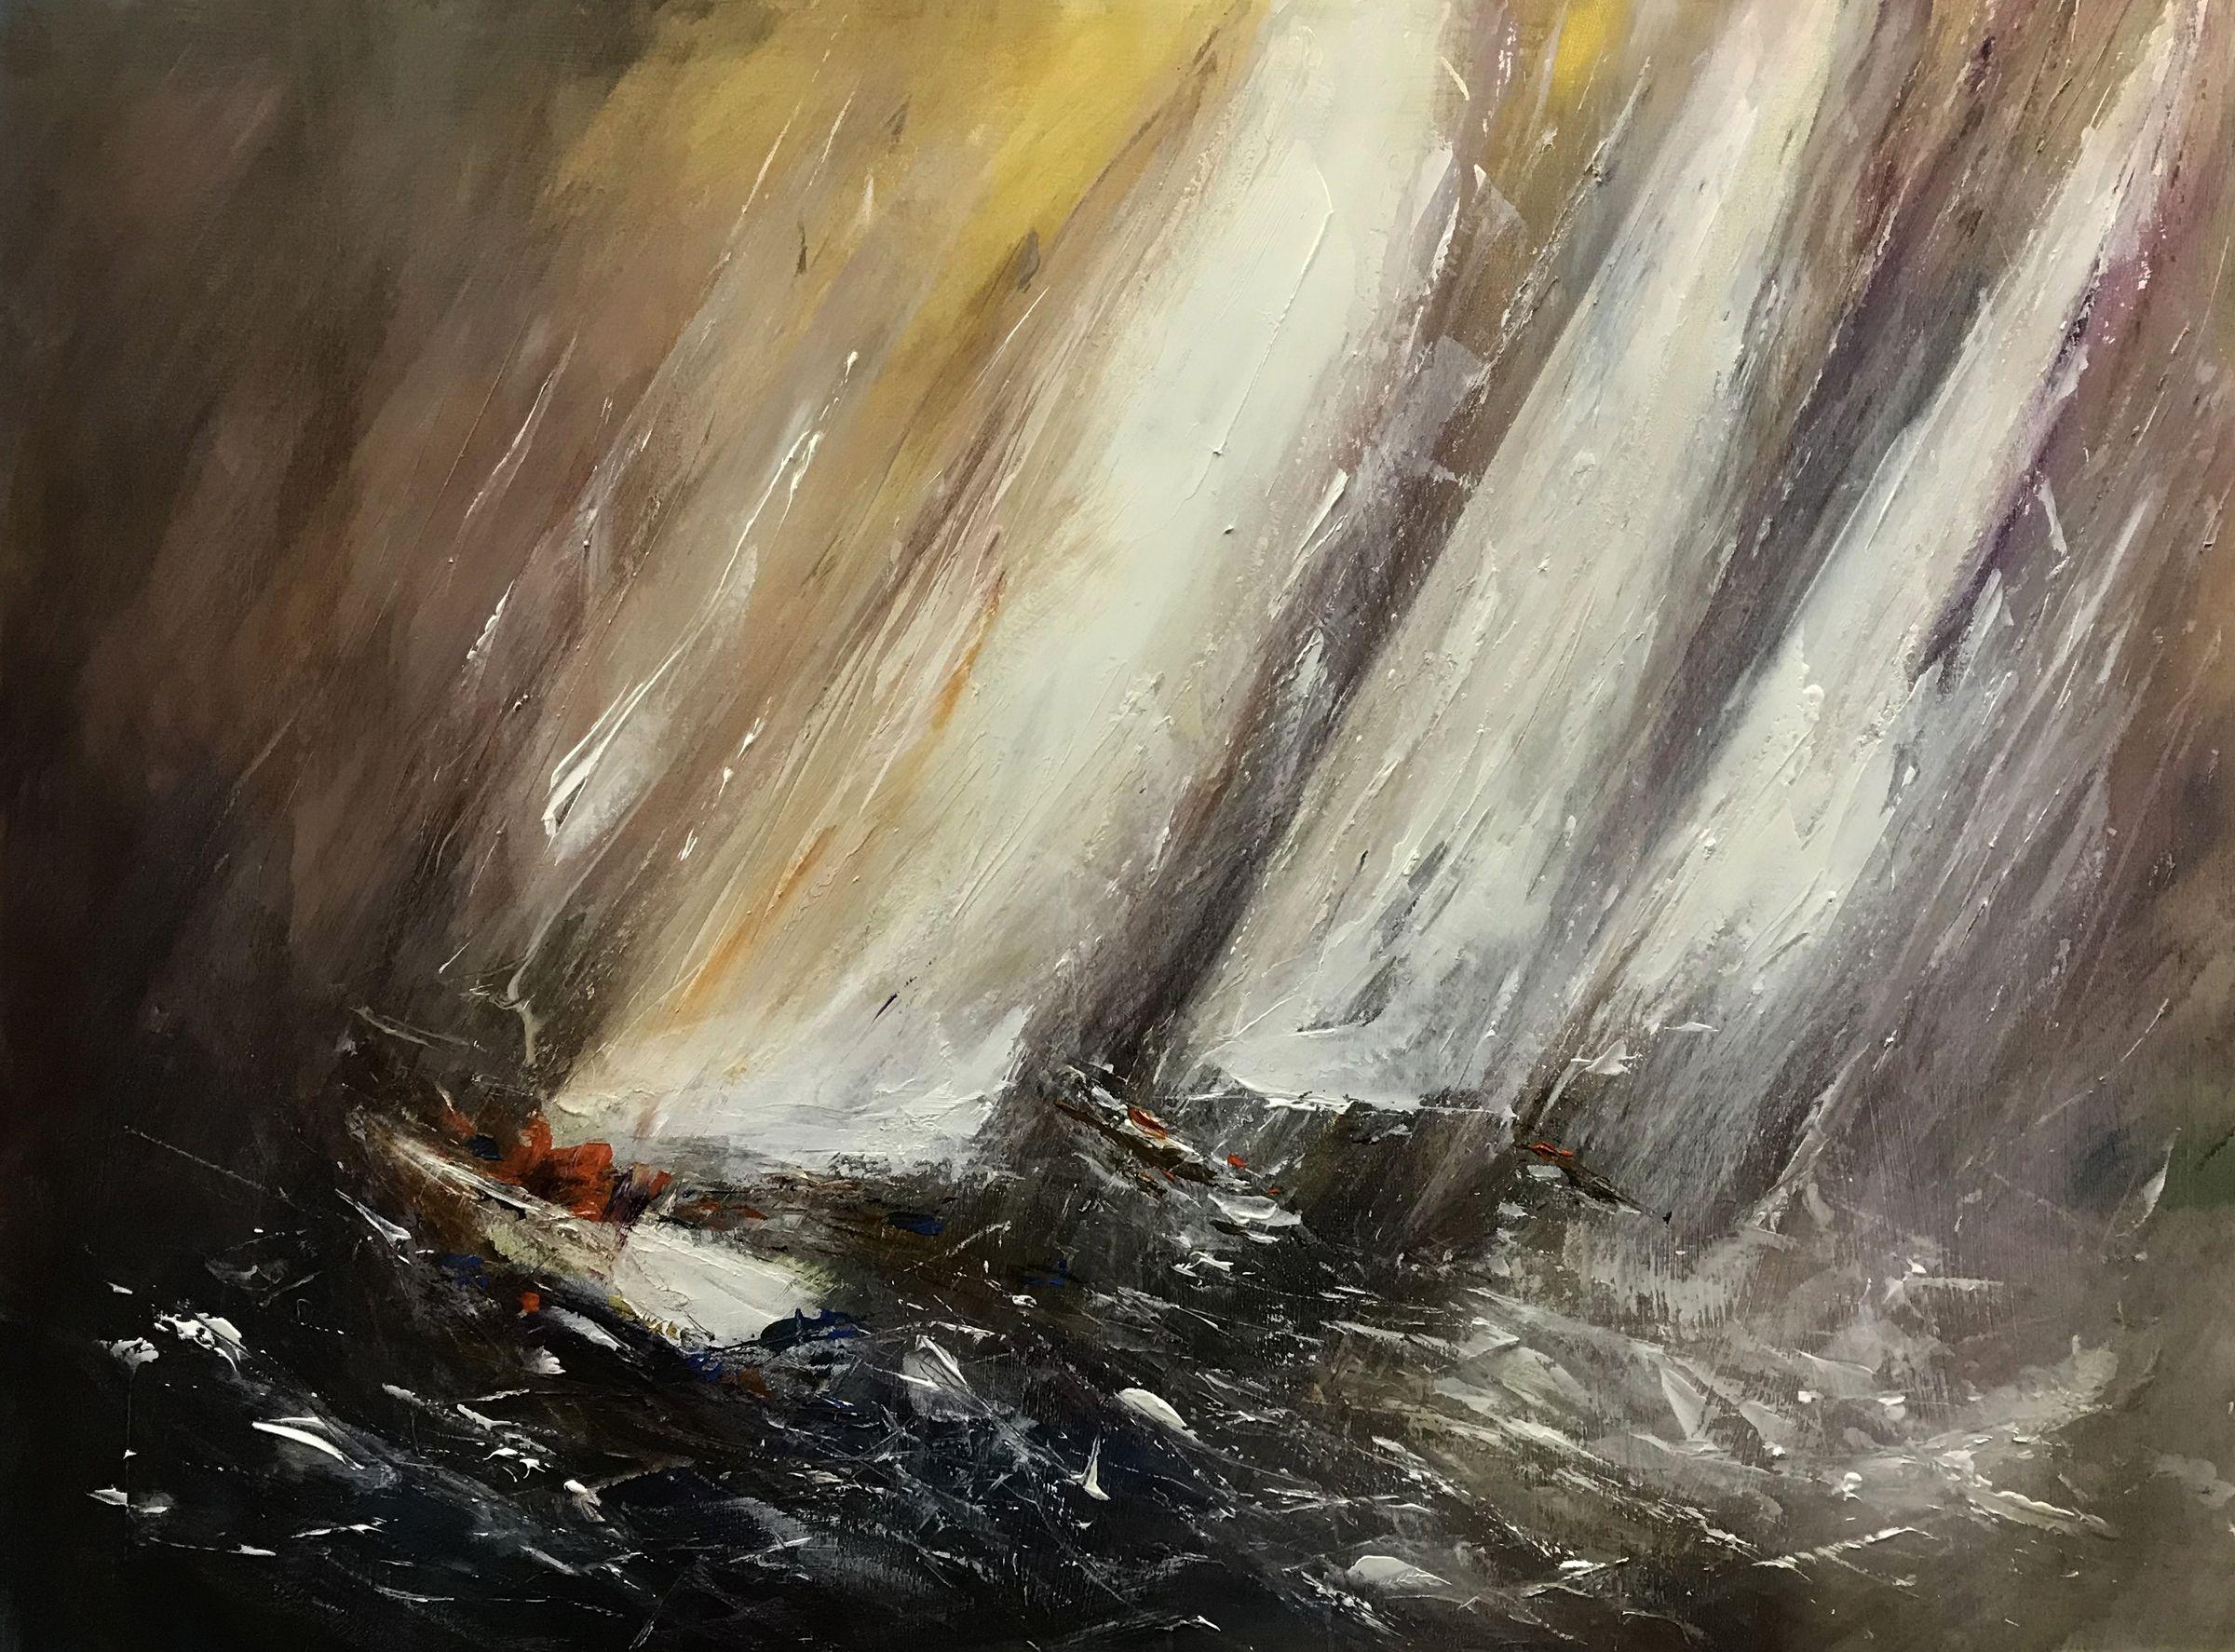 Plesh's Regatta paintings illuminate in vivid splendor the joy and wonder of sailing, allowing us to experience, as if first hand, the majesty of it all. The Regatta series illustrates his mastery of capturing a fleeting moment in time - the